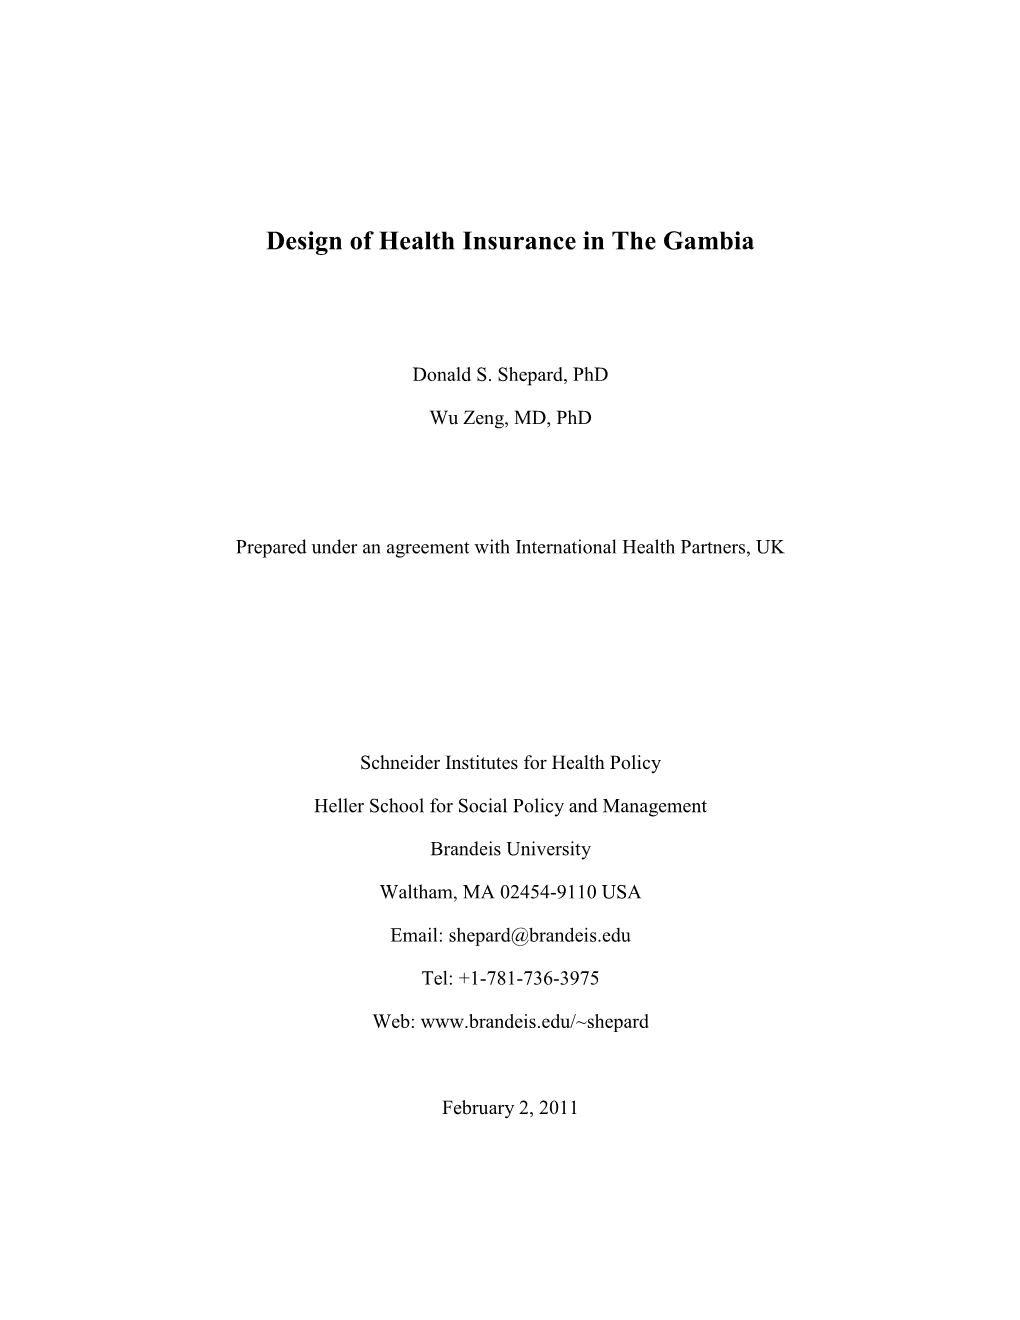 The Design of Health Insurance in the Gambia